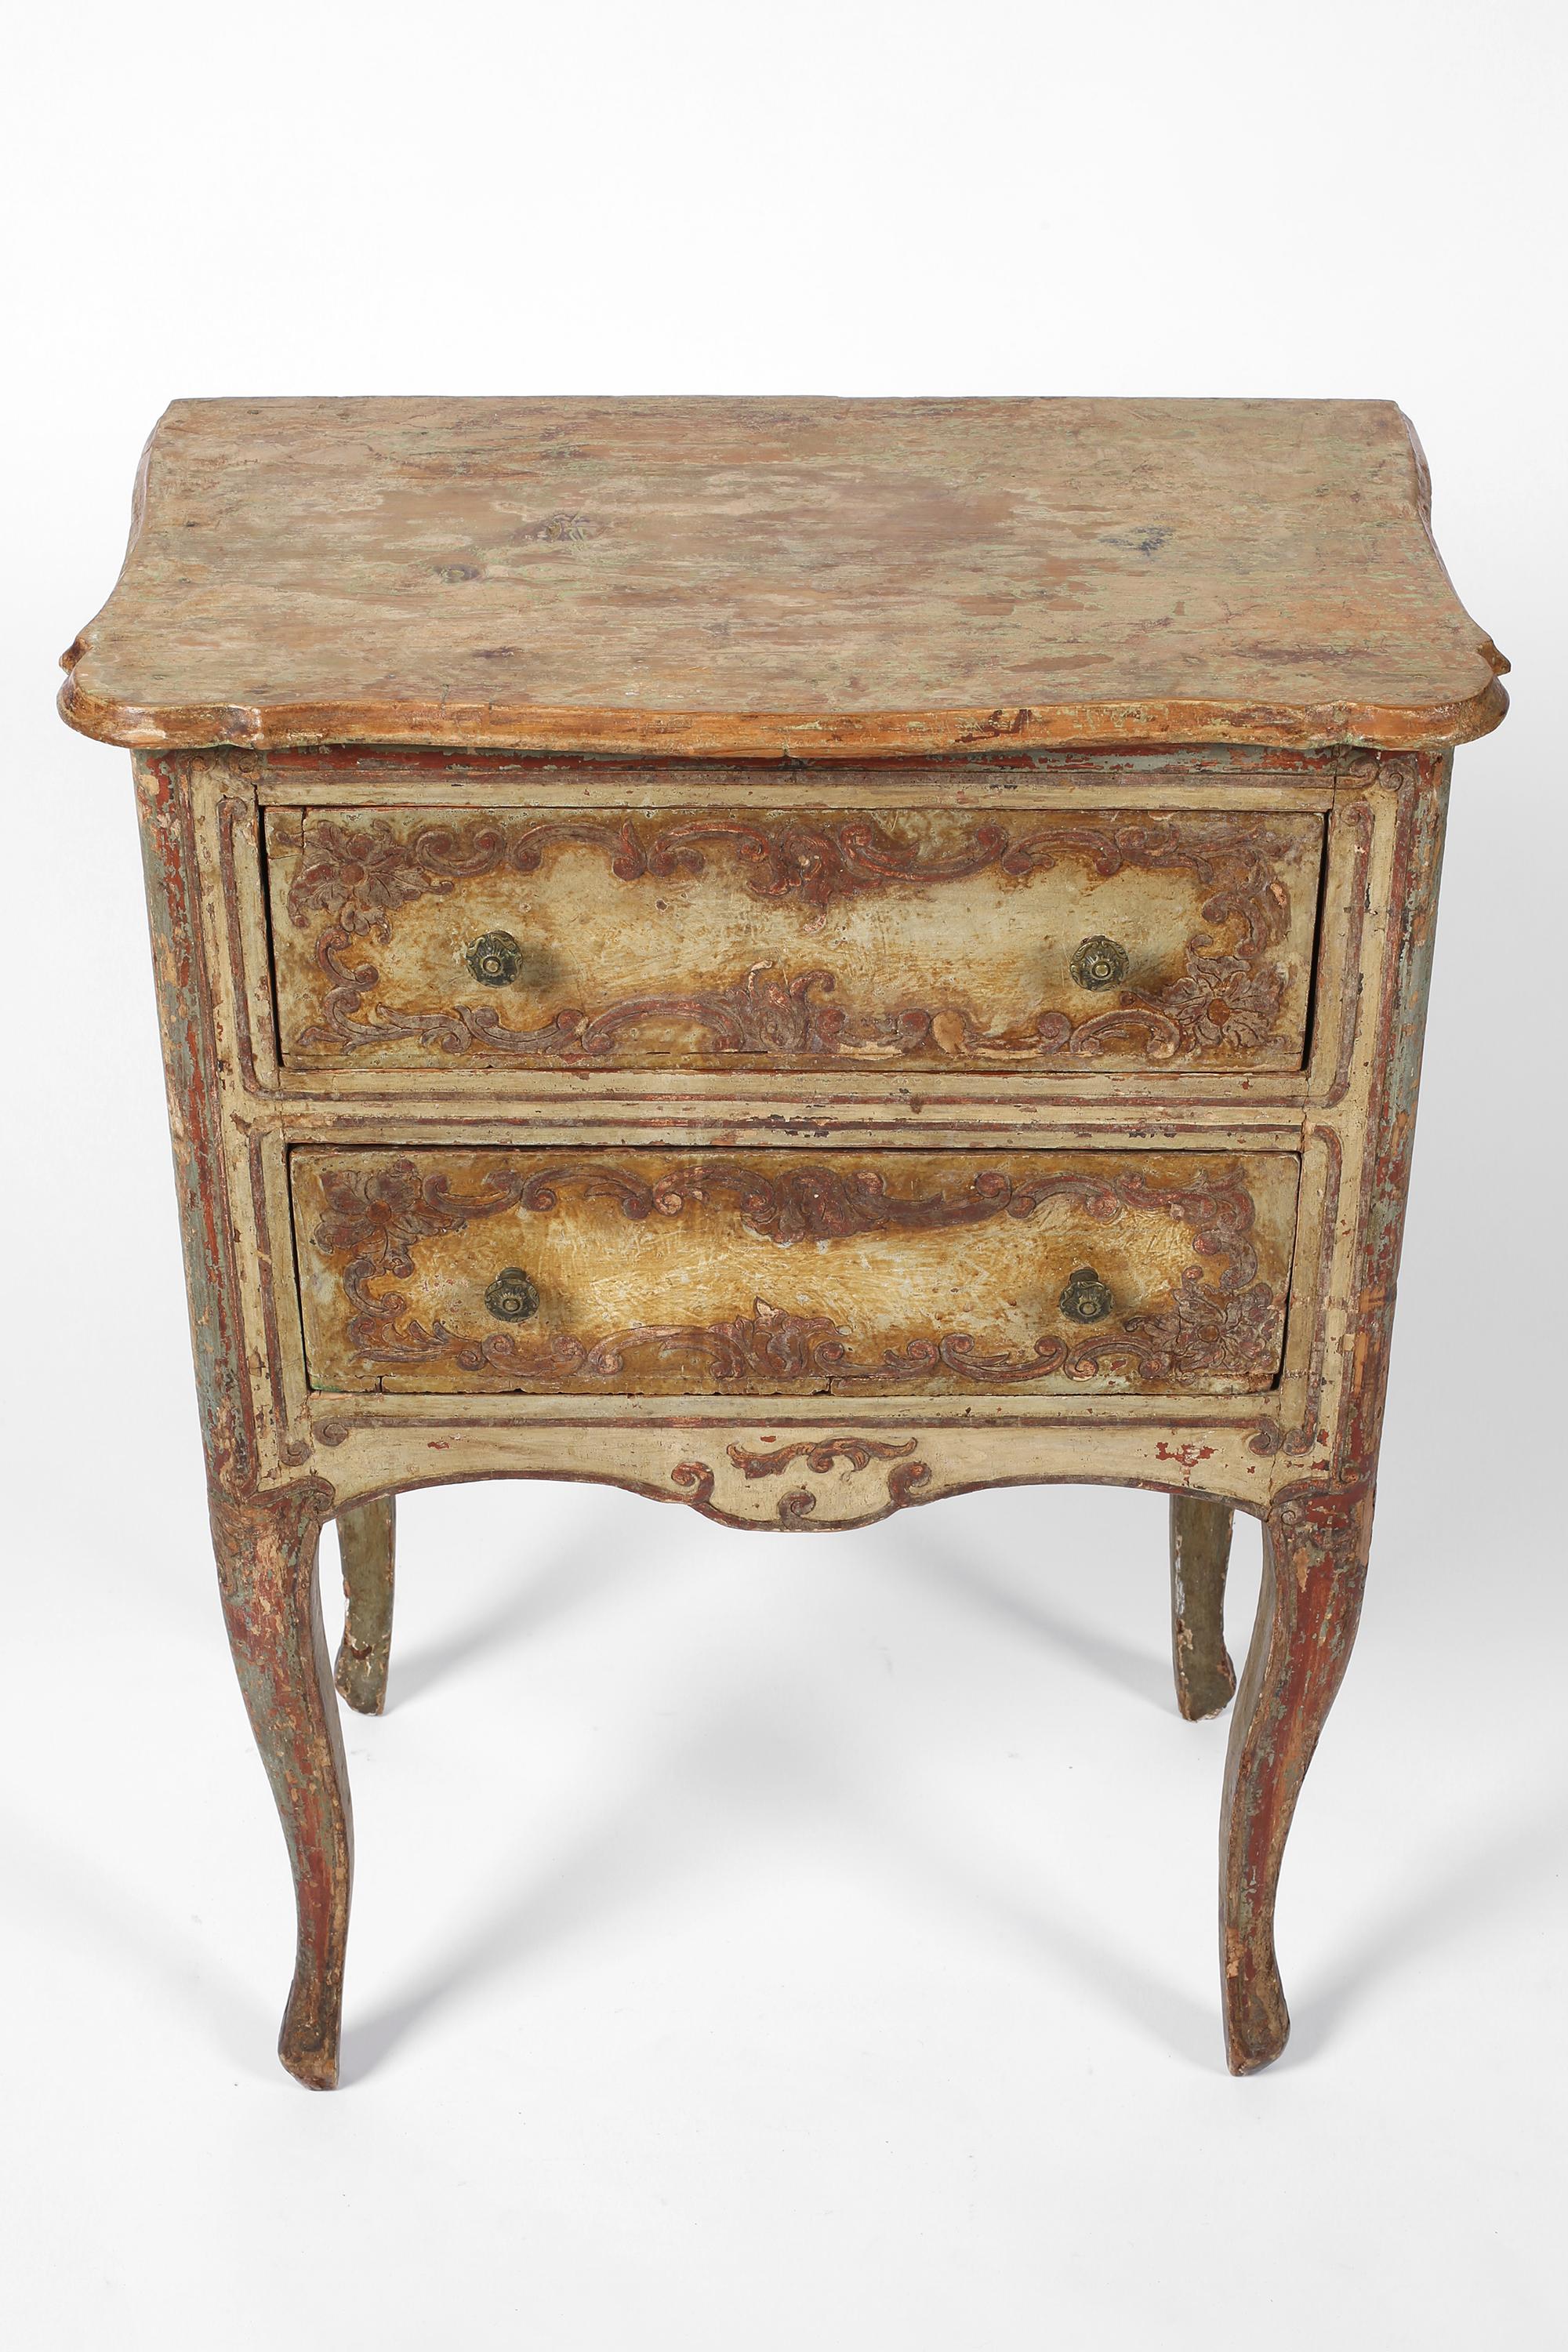 An elegant early 19th century Florentine side table/raised chest with the most fantastic muted and distressed original paintwork. Suitable as a generous bedside table, the two drawers with their original decorative bronze pulls. Italian, c. 1800.